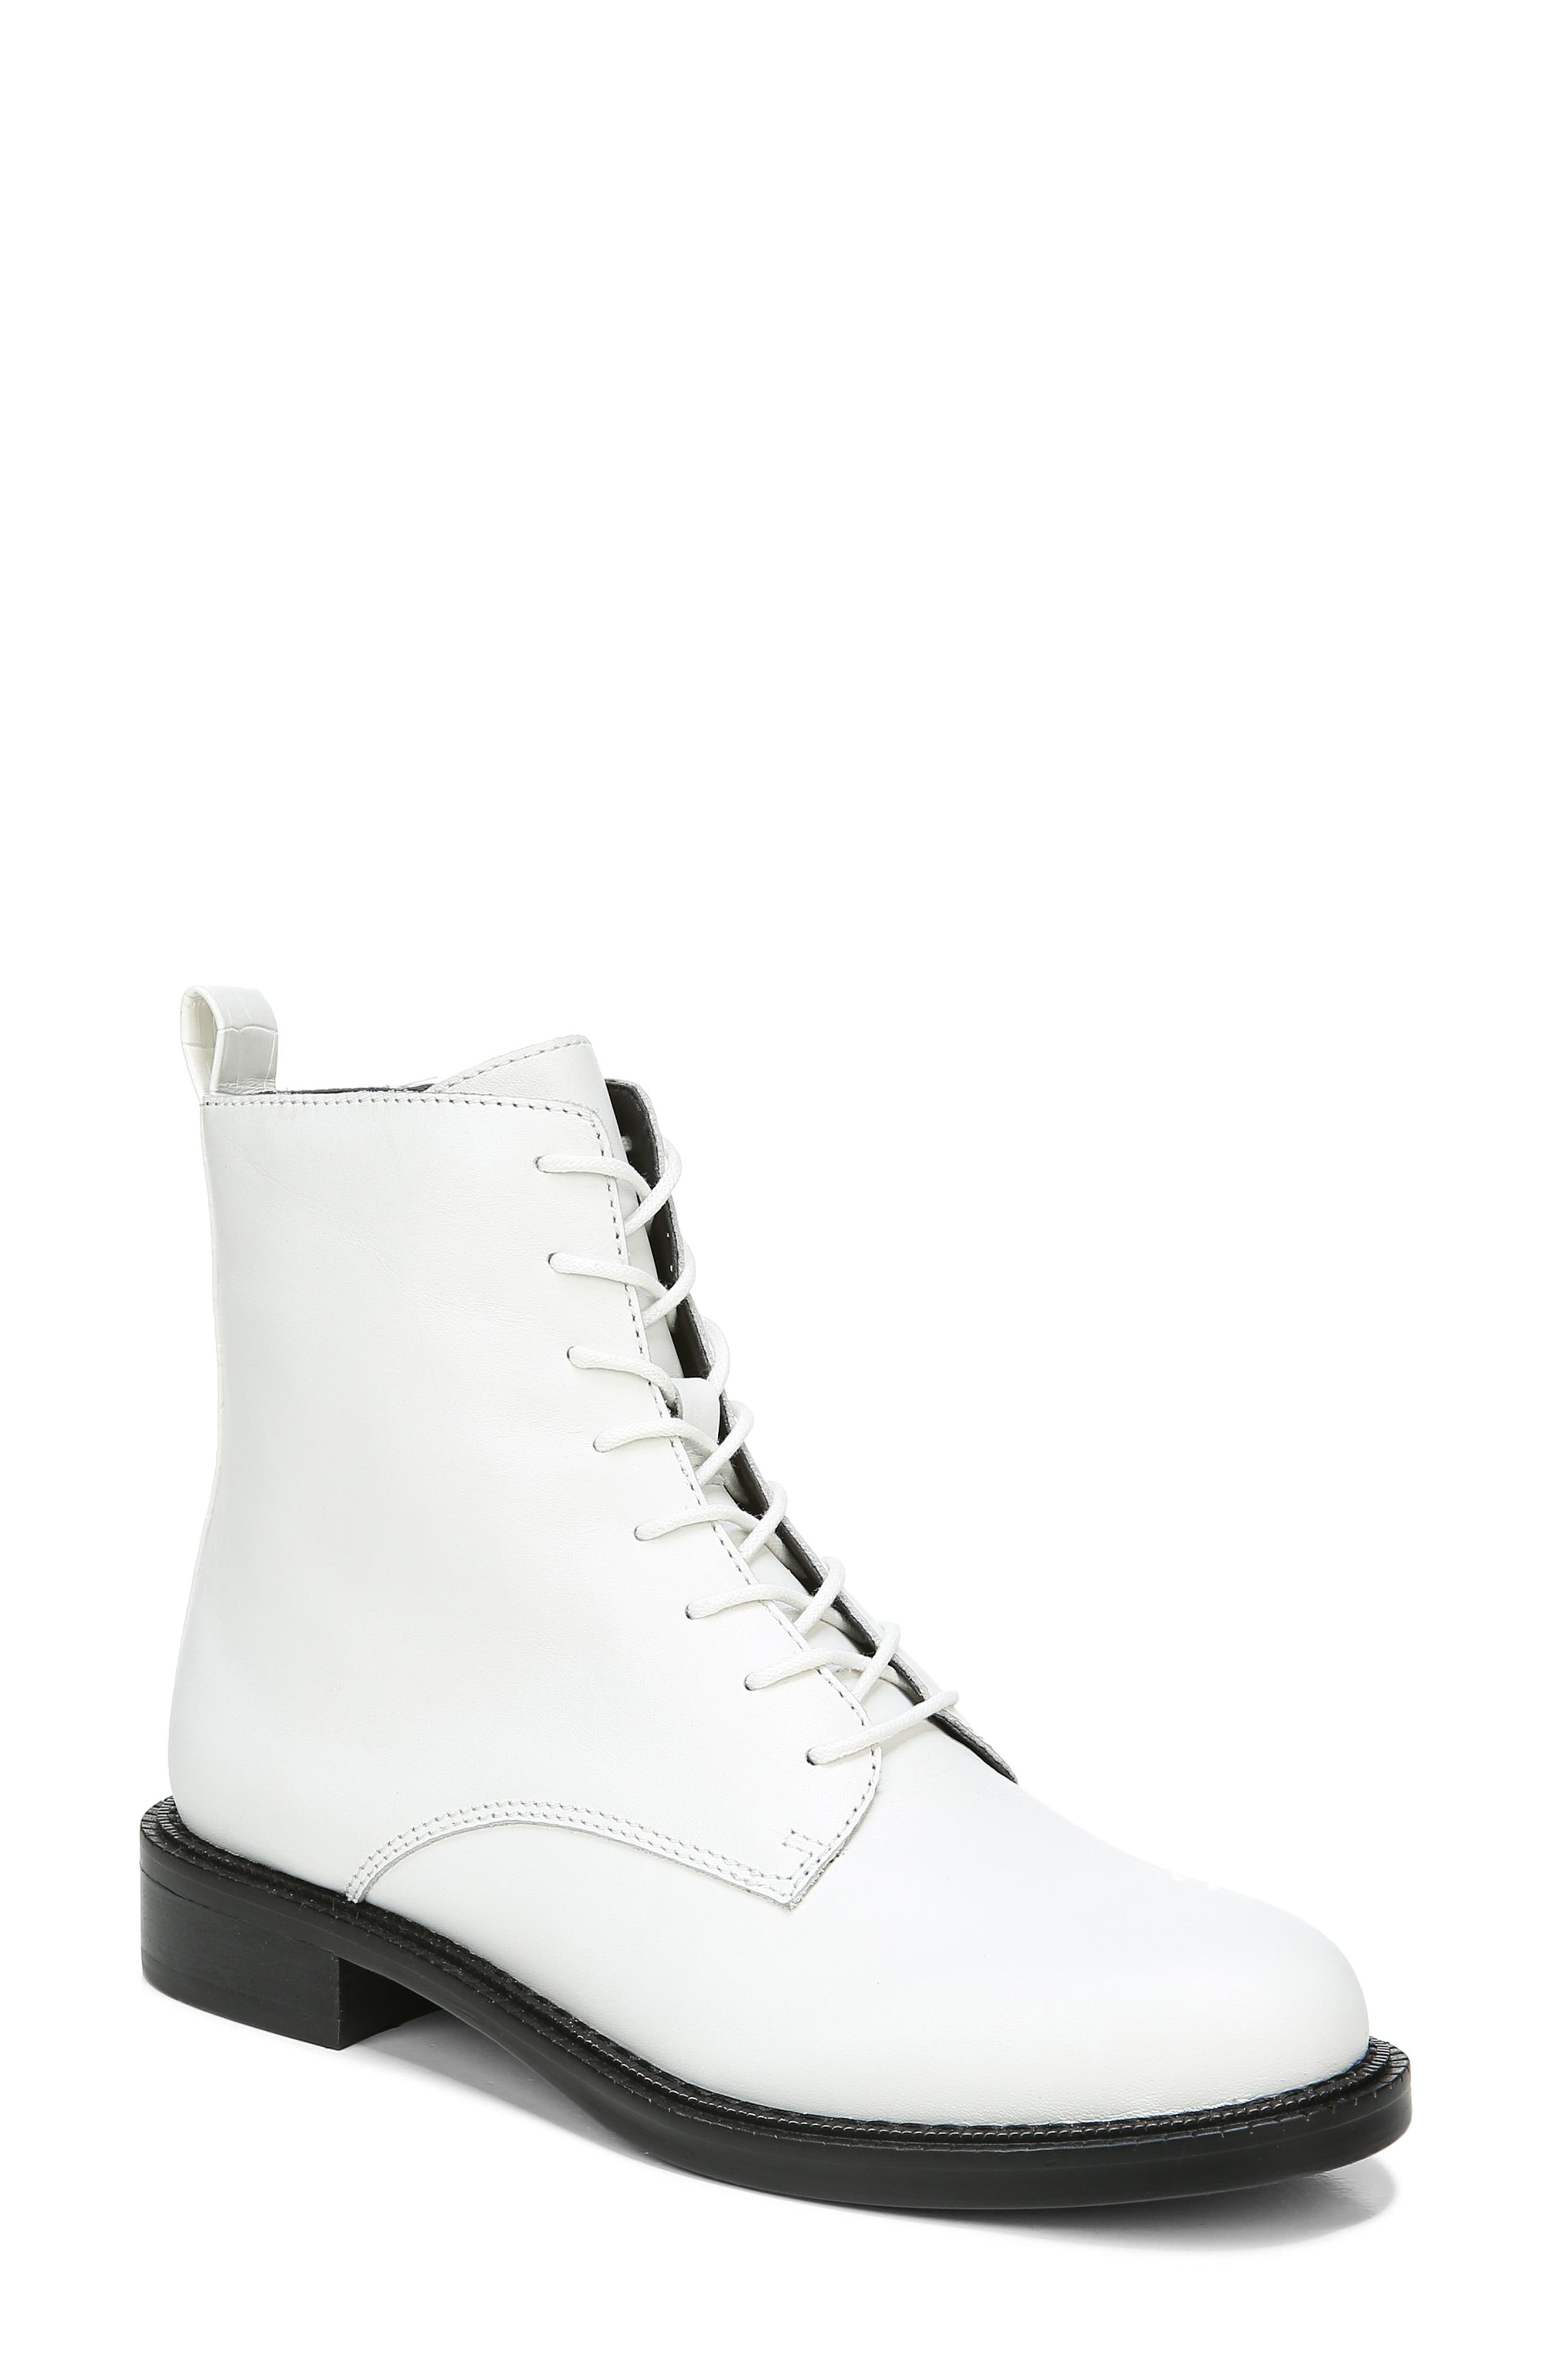 white booties nordstrom